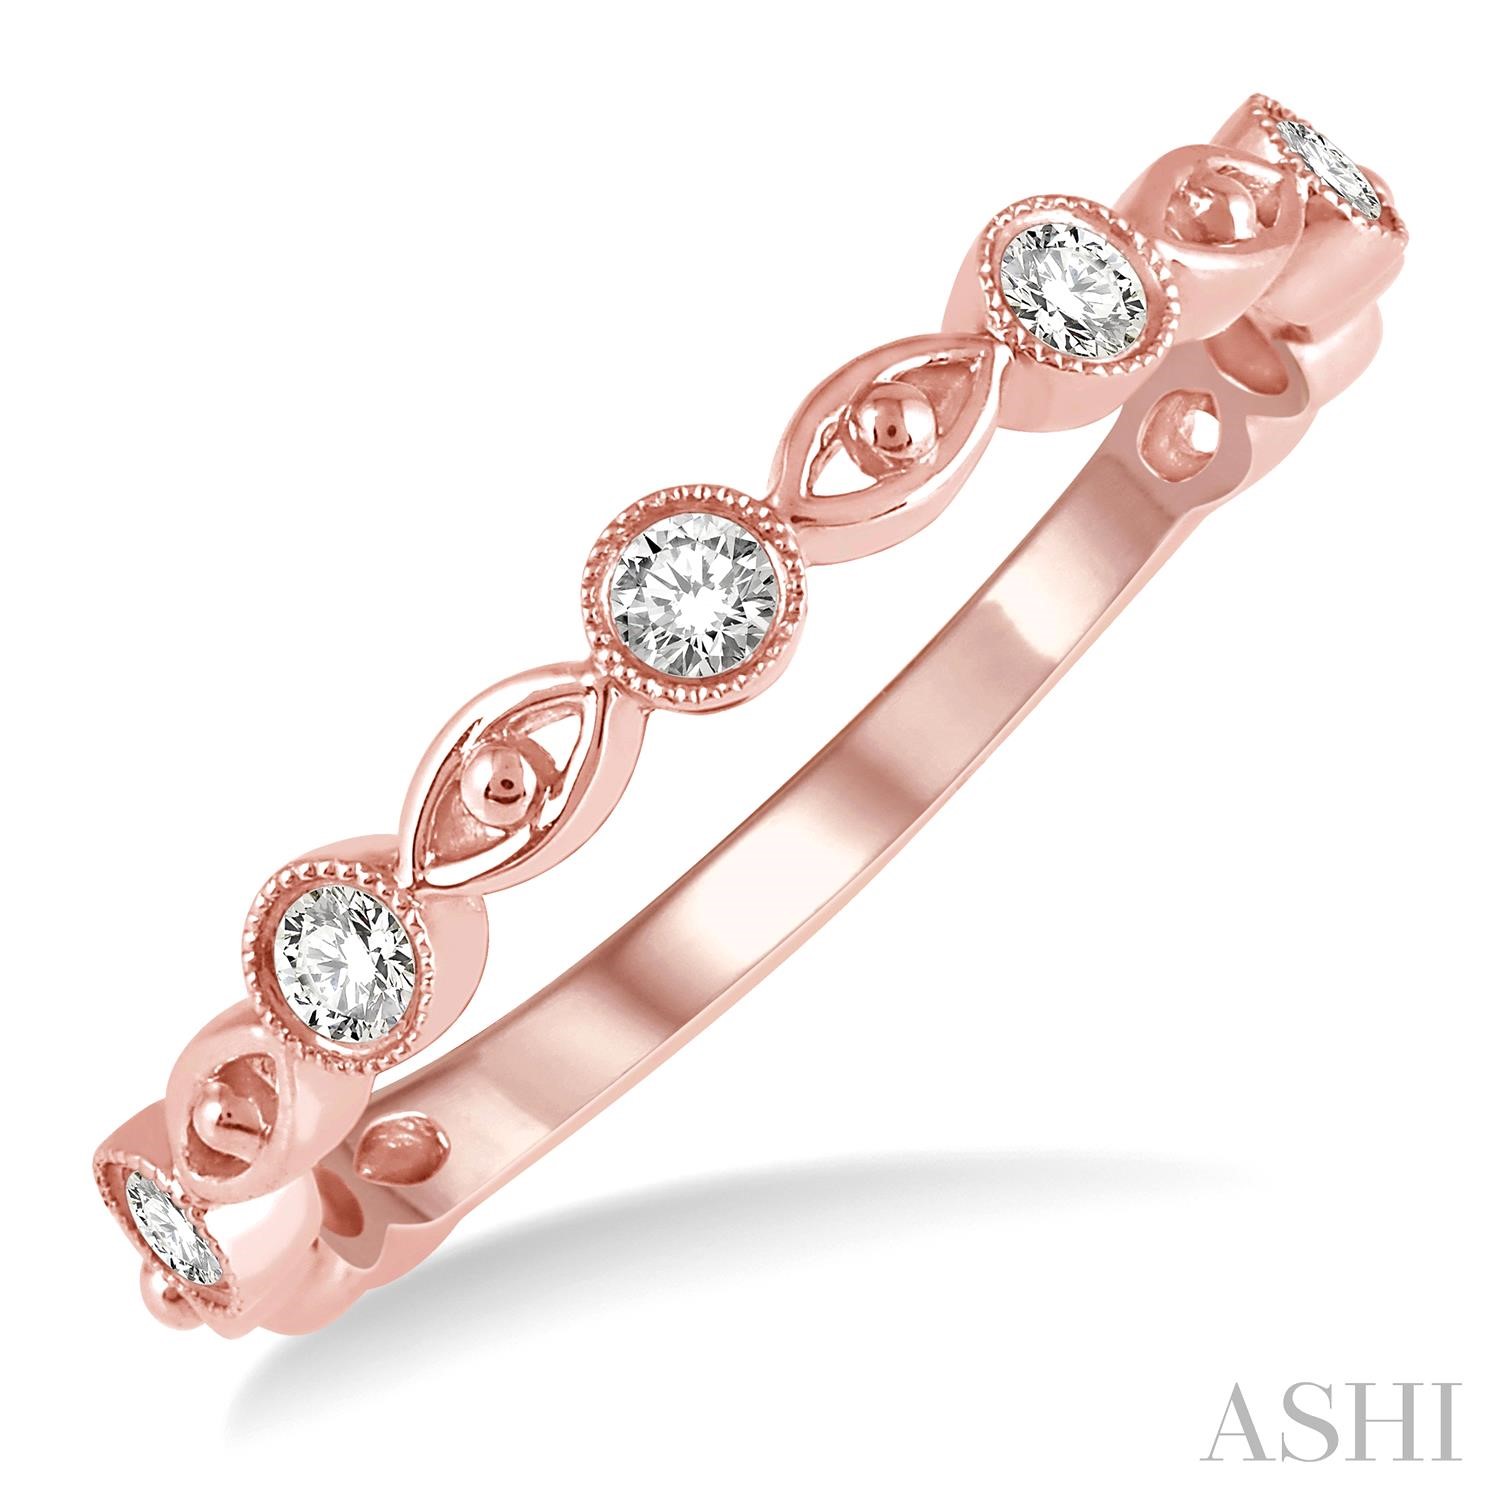 Stackable Diamond Fashion Band
1/5 ctw Lattice Marquise & Circular Mount Round Cut Diamond Stackable Band in 14K Rose Gold